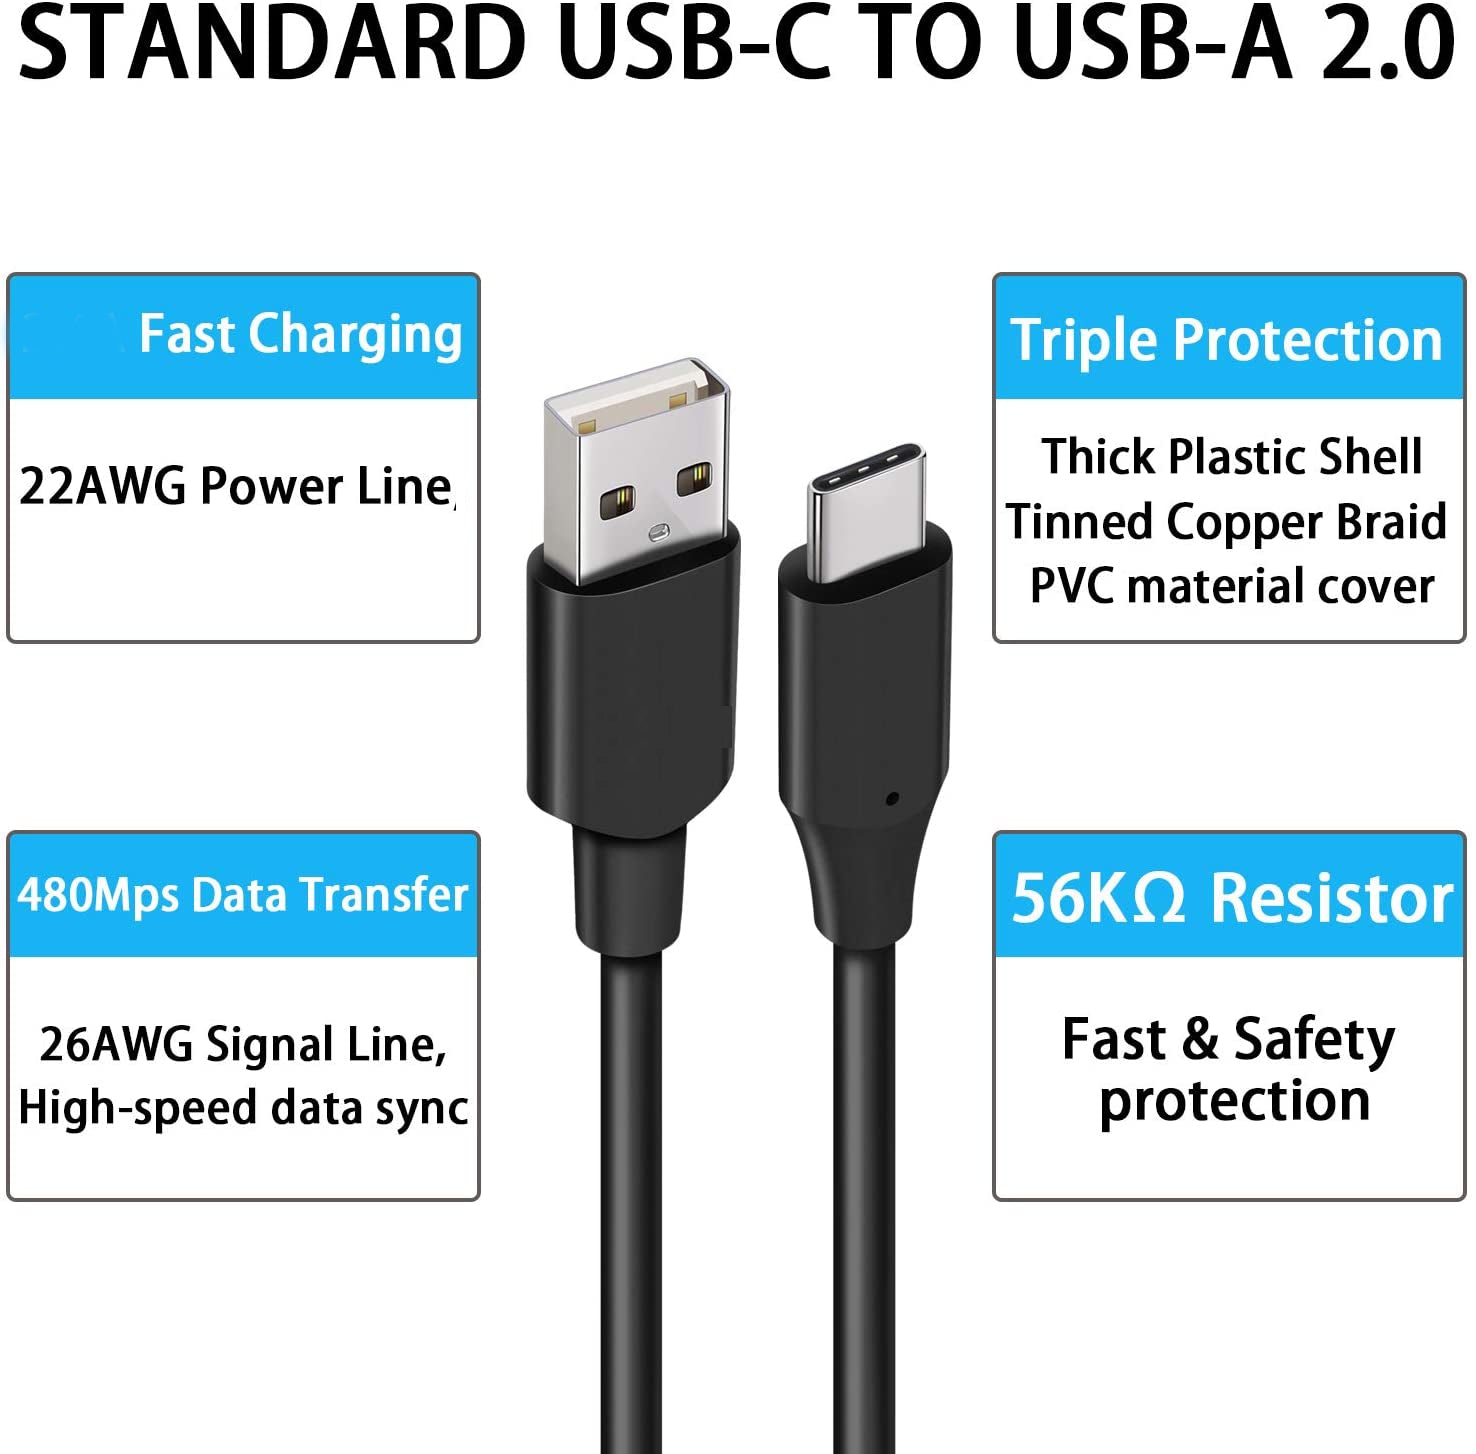 6ft and 10ft Long USB-C Cables Fast Charge TYPE-C Cord Power Wire Data Sync High Speed - ONY73